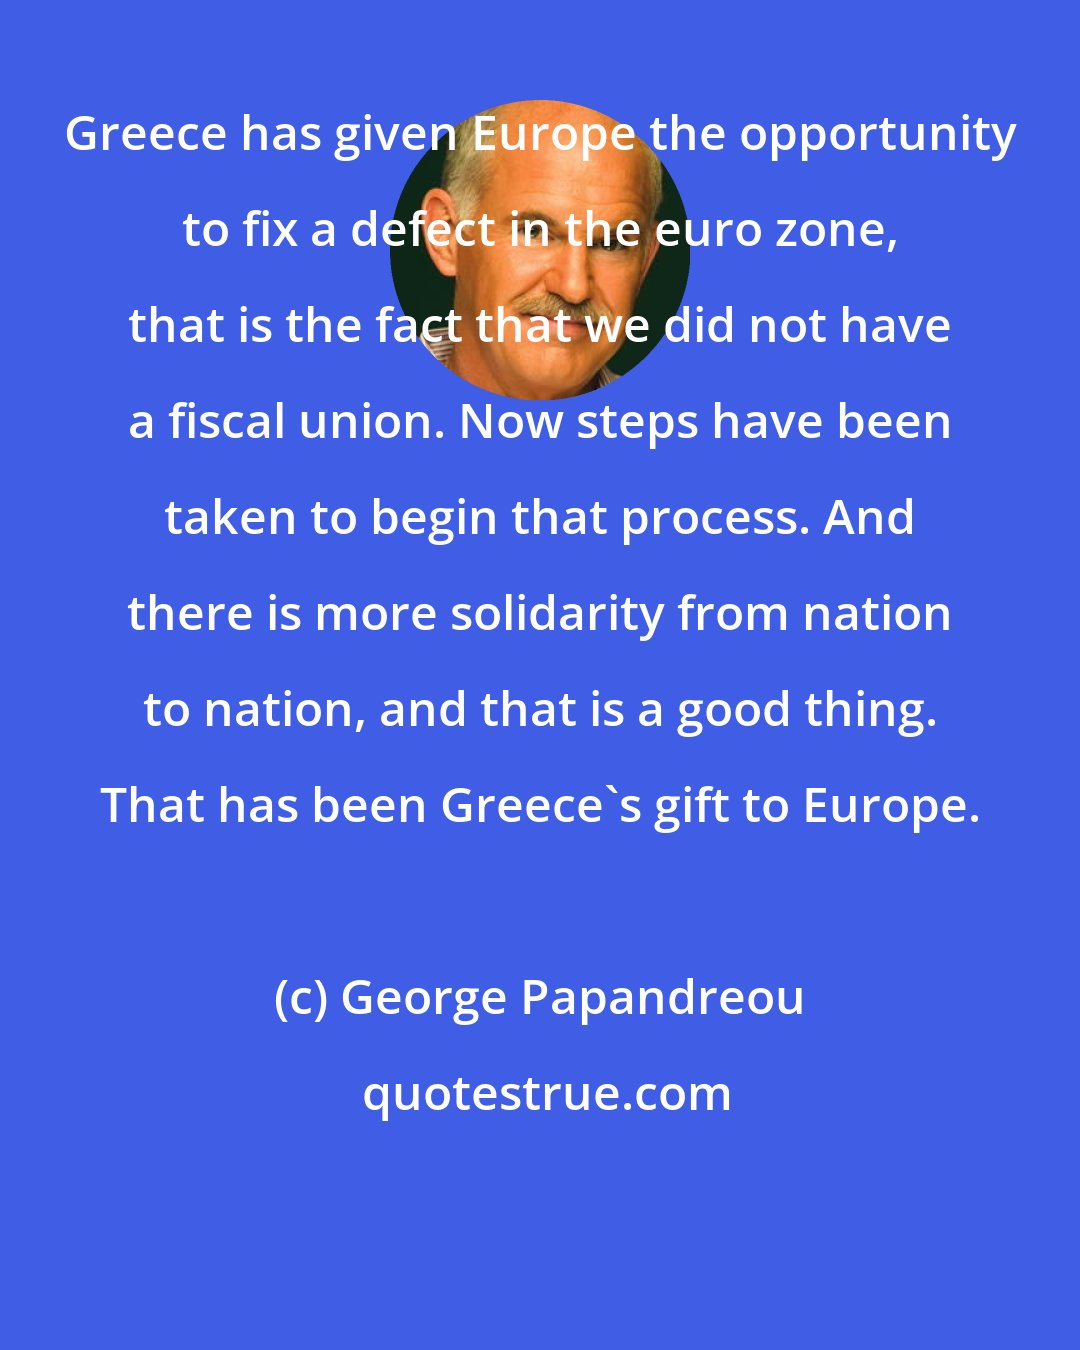 George Papandreou: Greece has given Europe the opportunity to fix a defect in the euro zone, that is the fact that we did not have a fiscal union. Now steps have been taken to begin that process. And there is more solidarity from nation to nation, and that is a good thing. That has been Greece's gift to Europe.